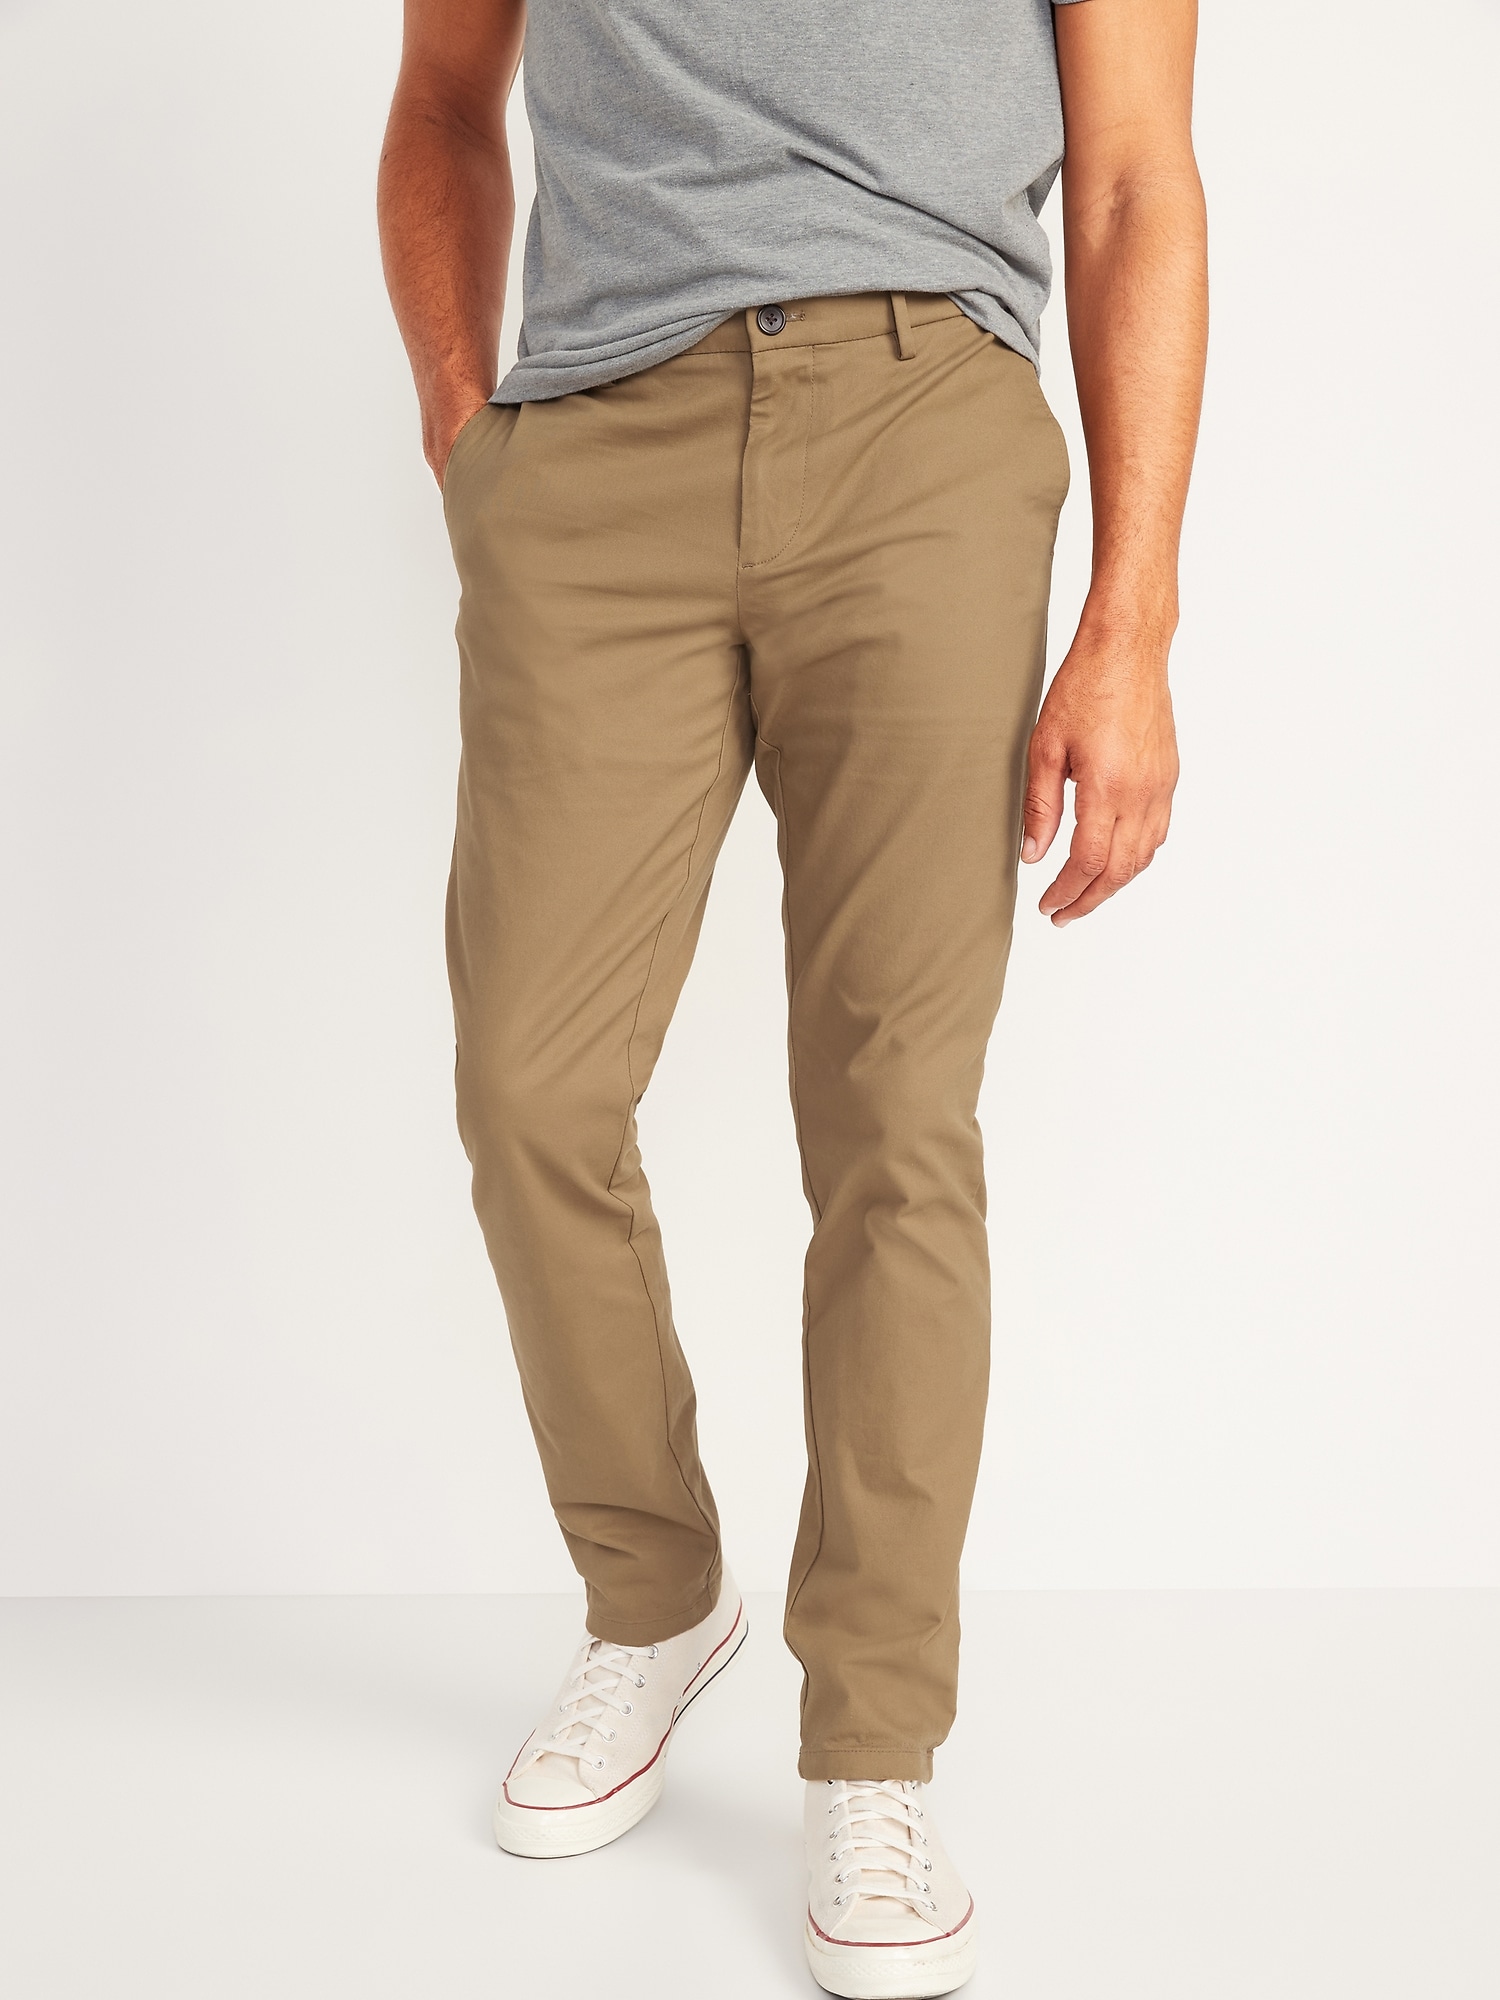 Milwaukee Men's 40 in. x 30 in. Khaki Cotton/Polyester/Spandex Flex Work  Pants with 6 Pockets 701K-4030 - The Home Depot